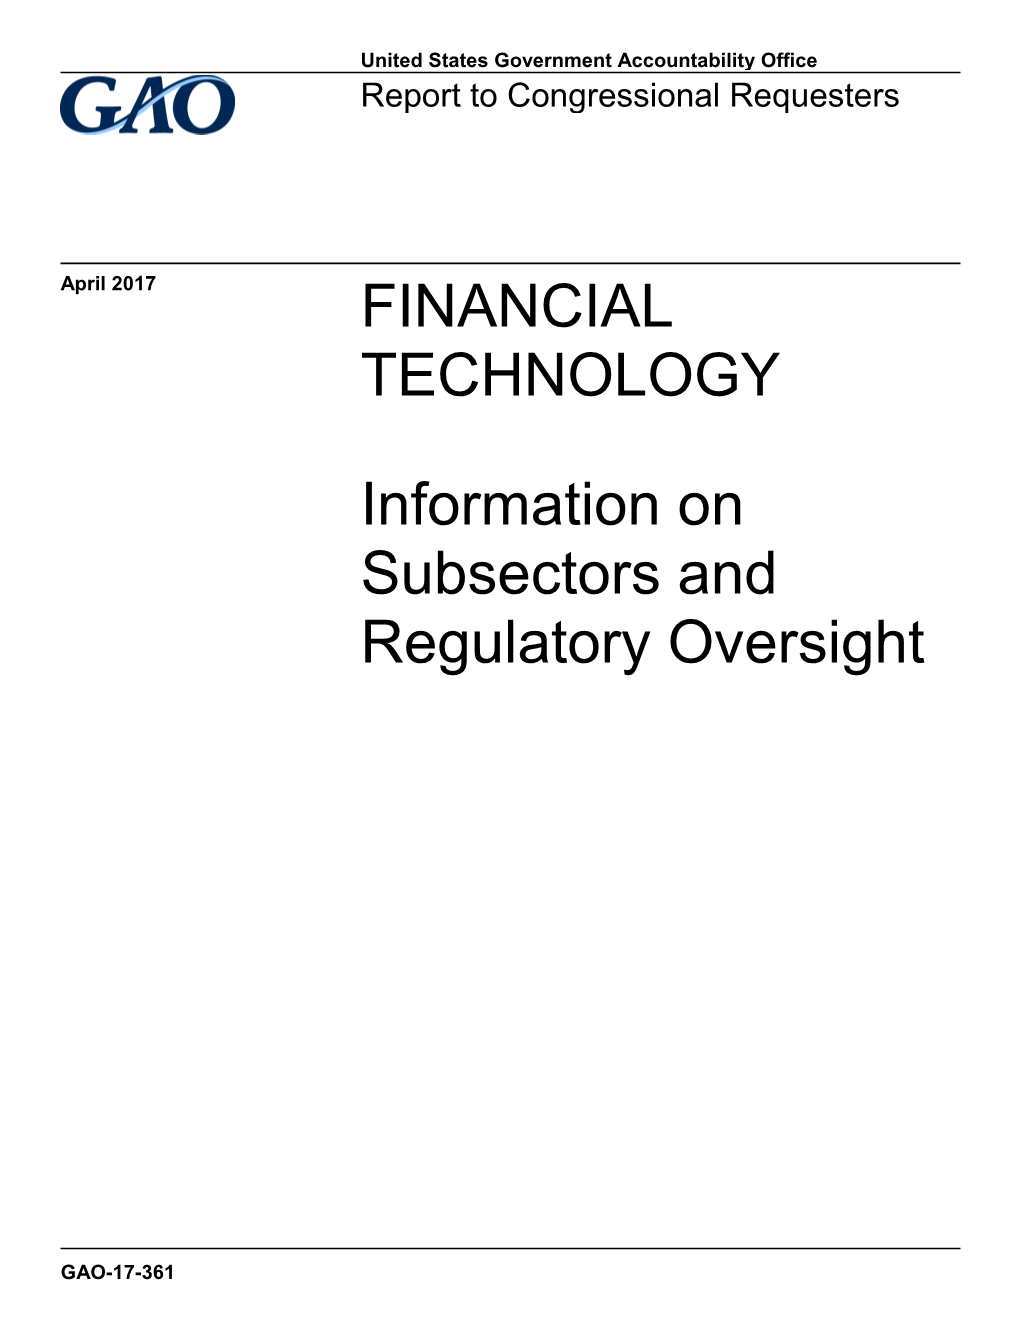 Financial Technology – Information on Subsectors and Regulatory Oversight